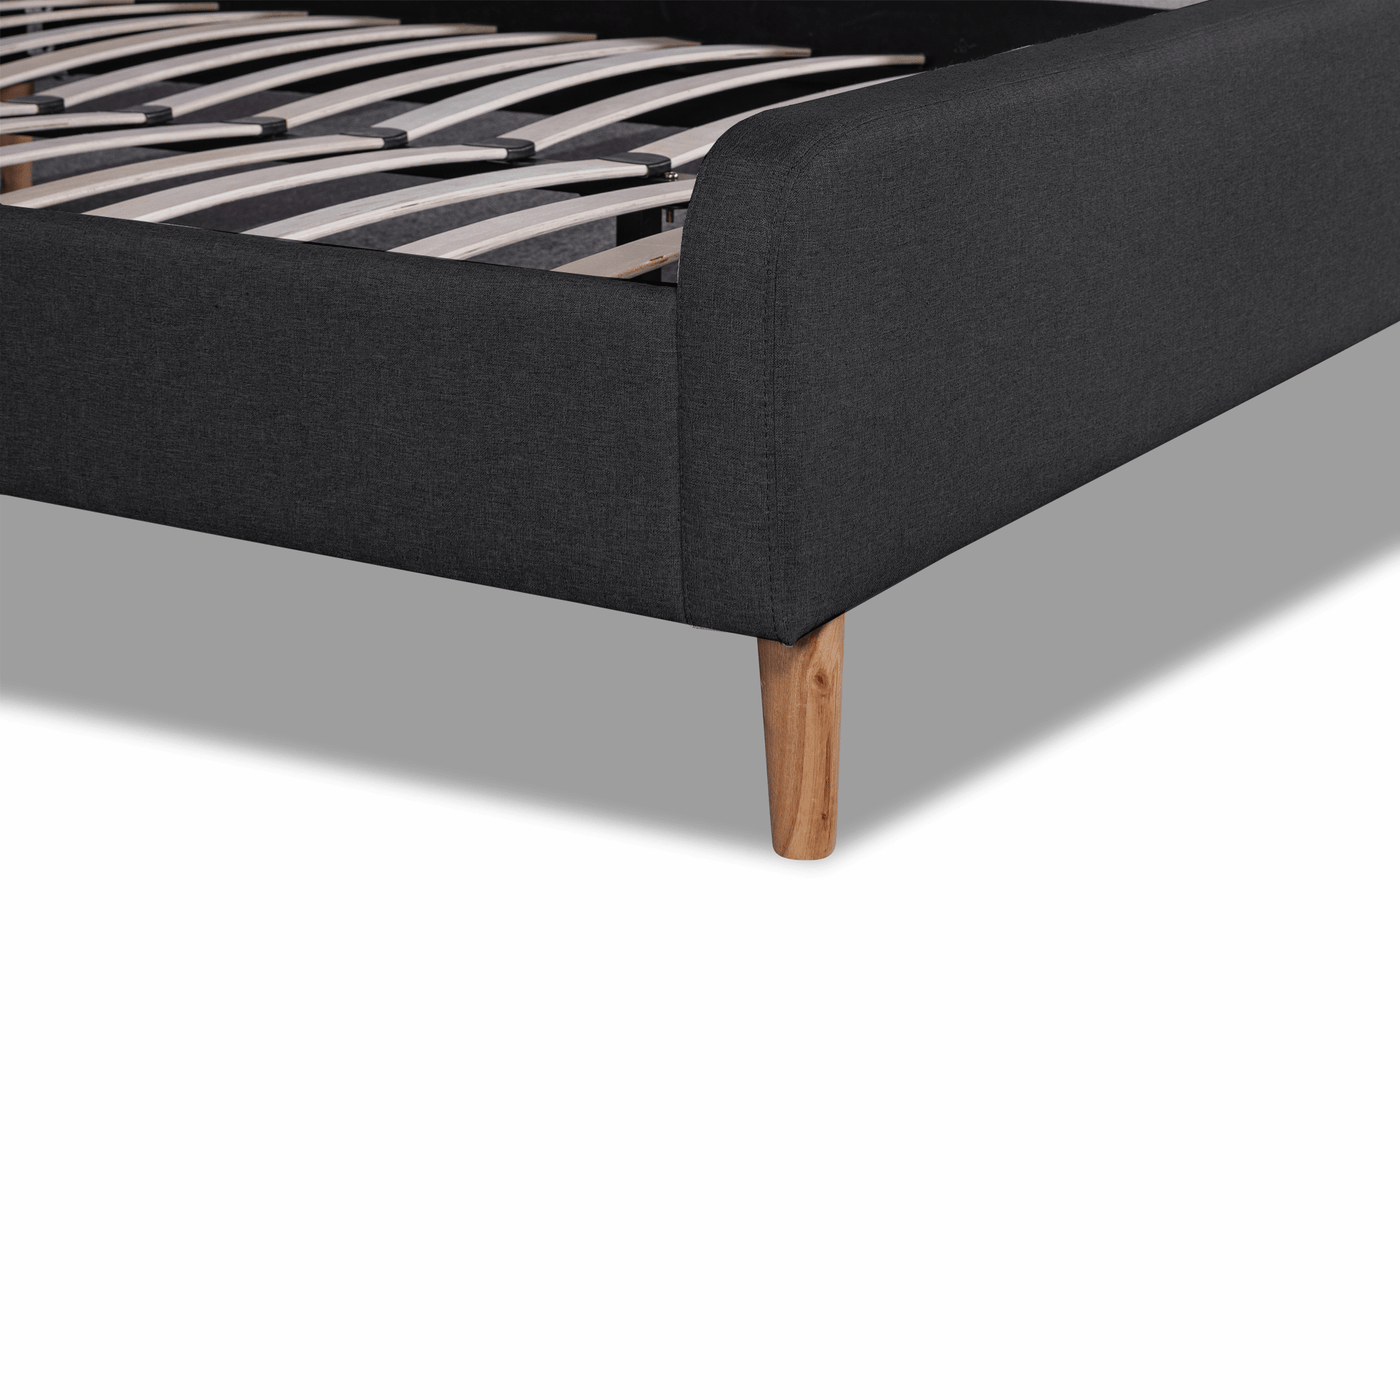 King Bed Frame in Fossil Grey Fabric